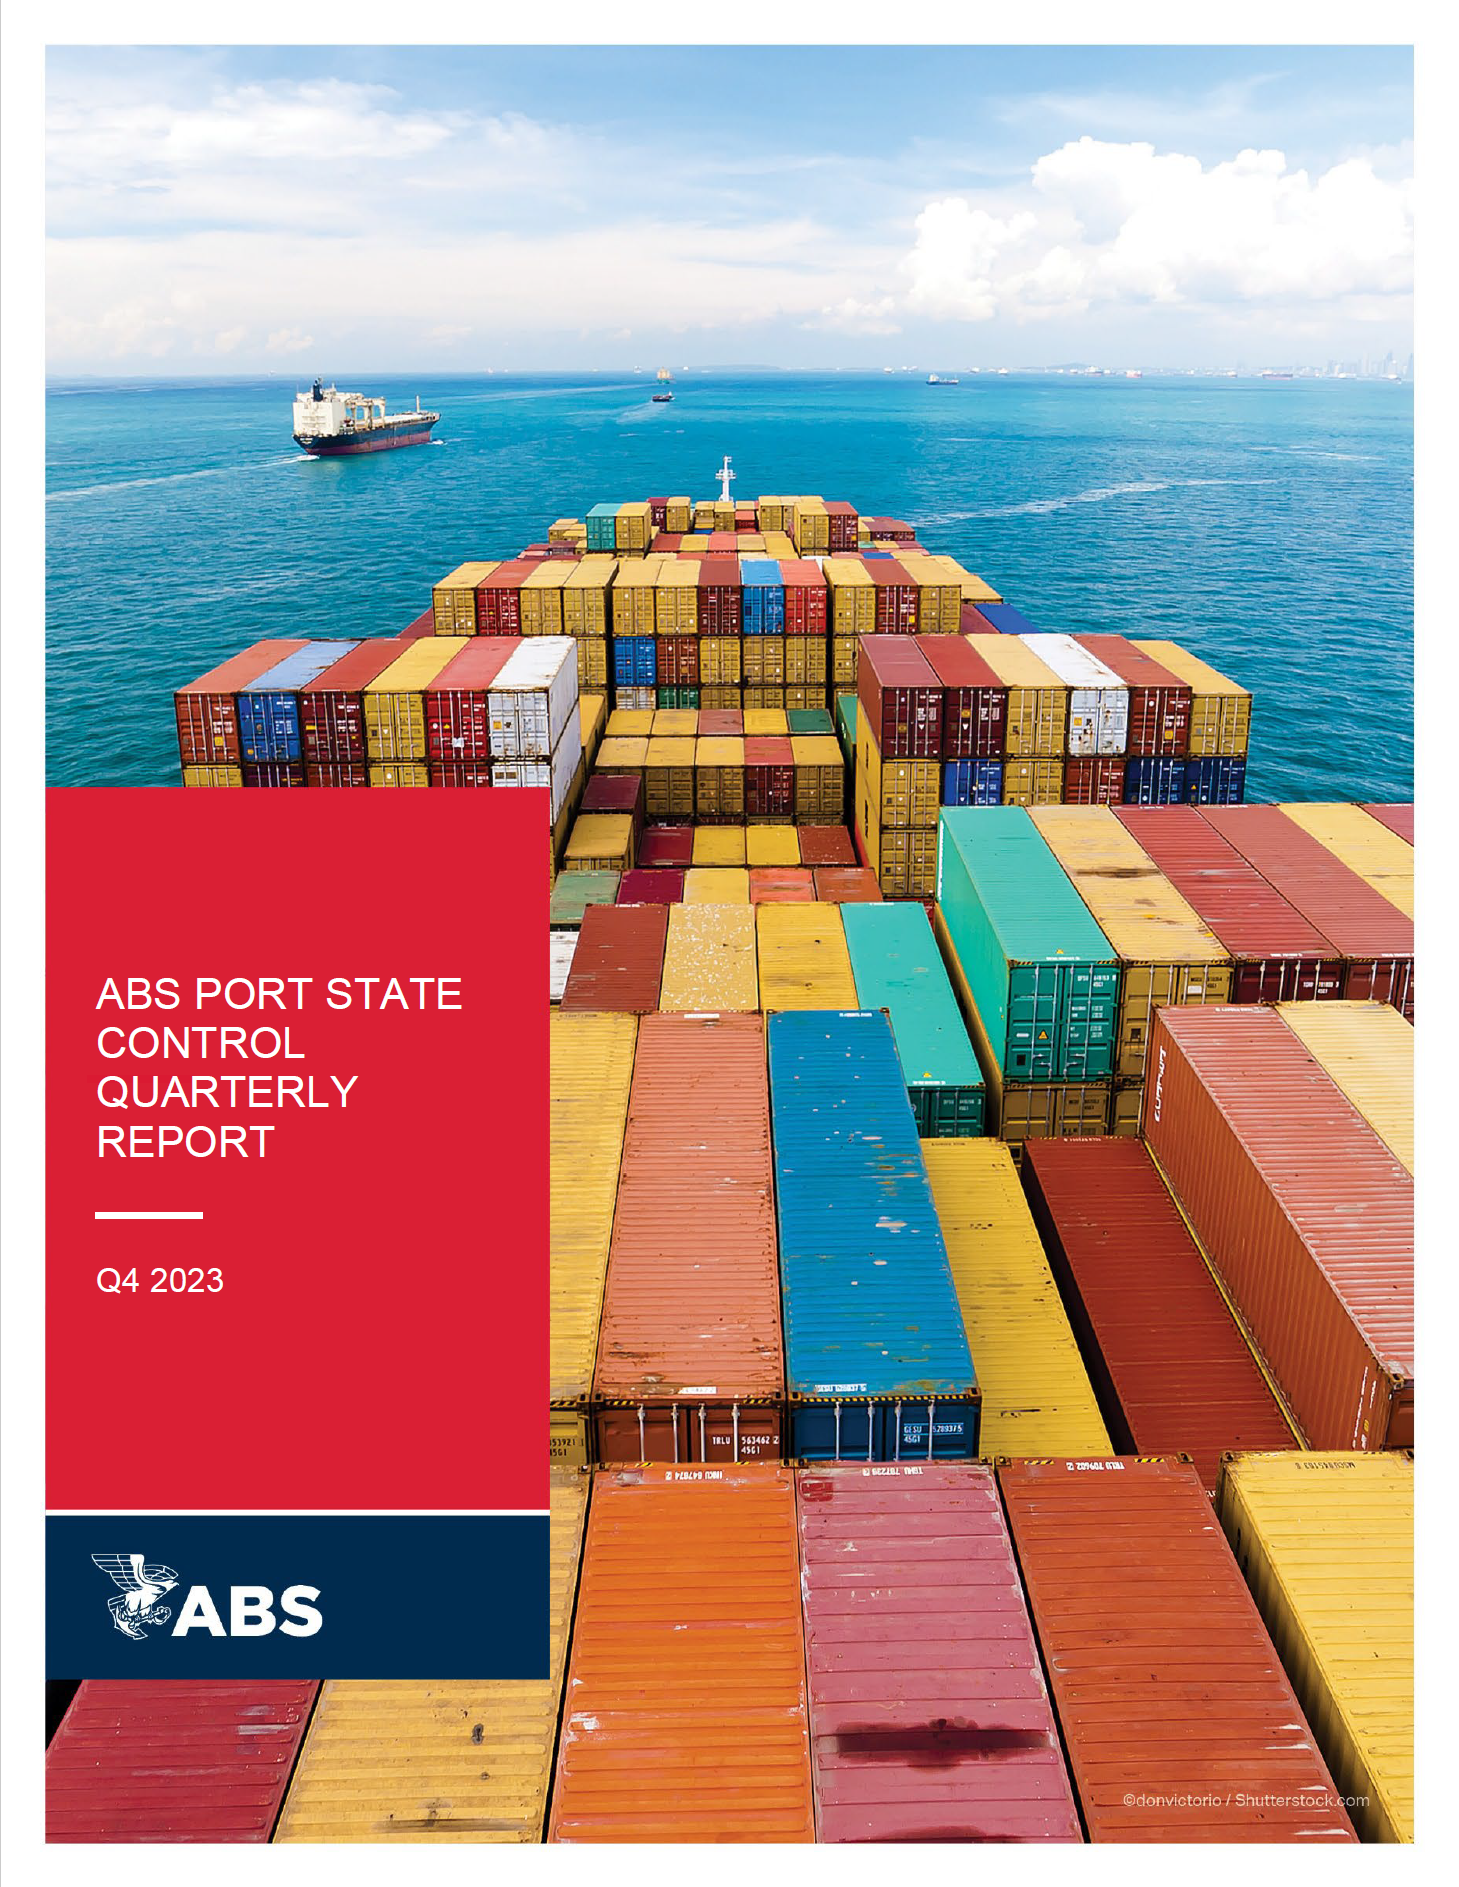 ABS Port State Control Quarterly Report Q4 2021